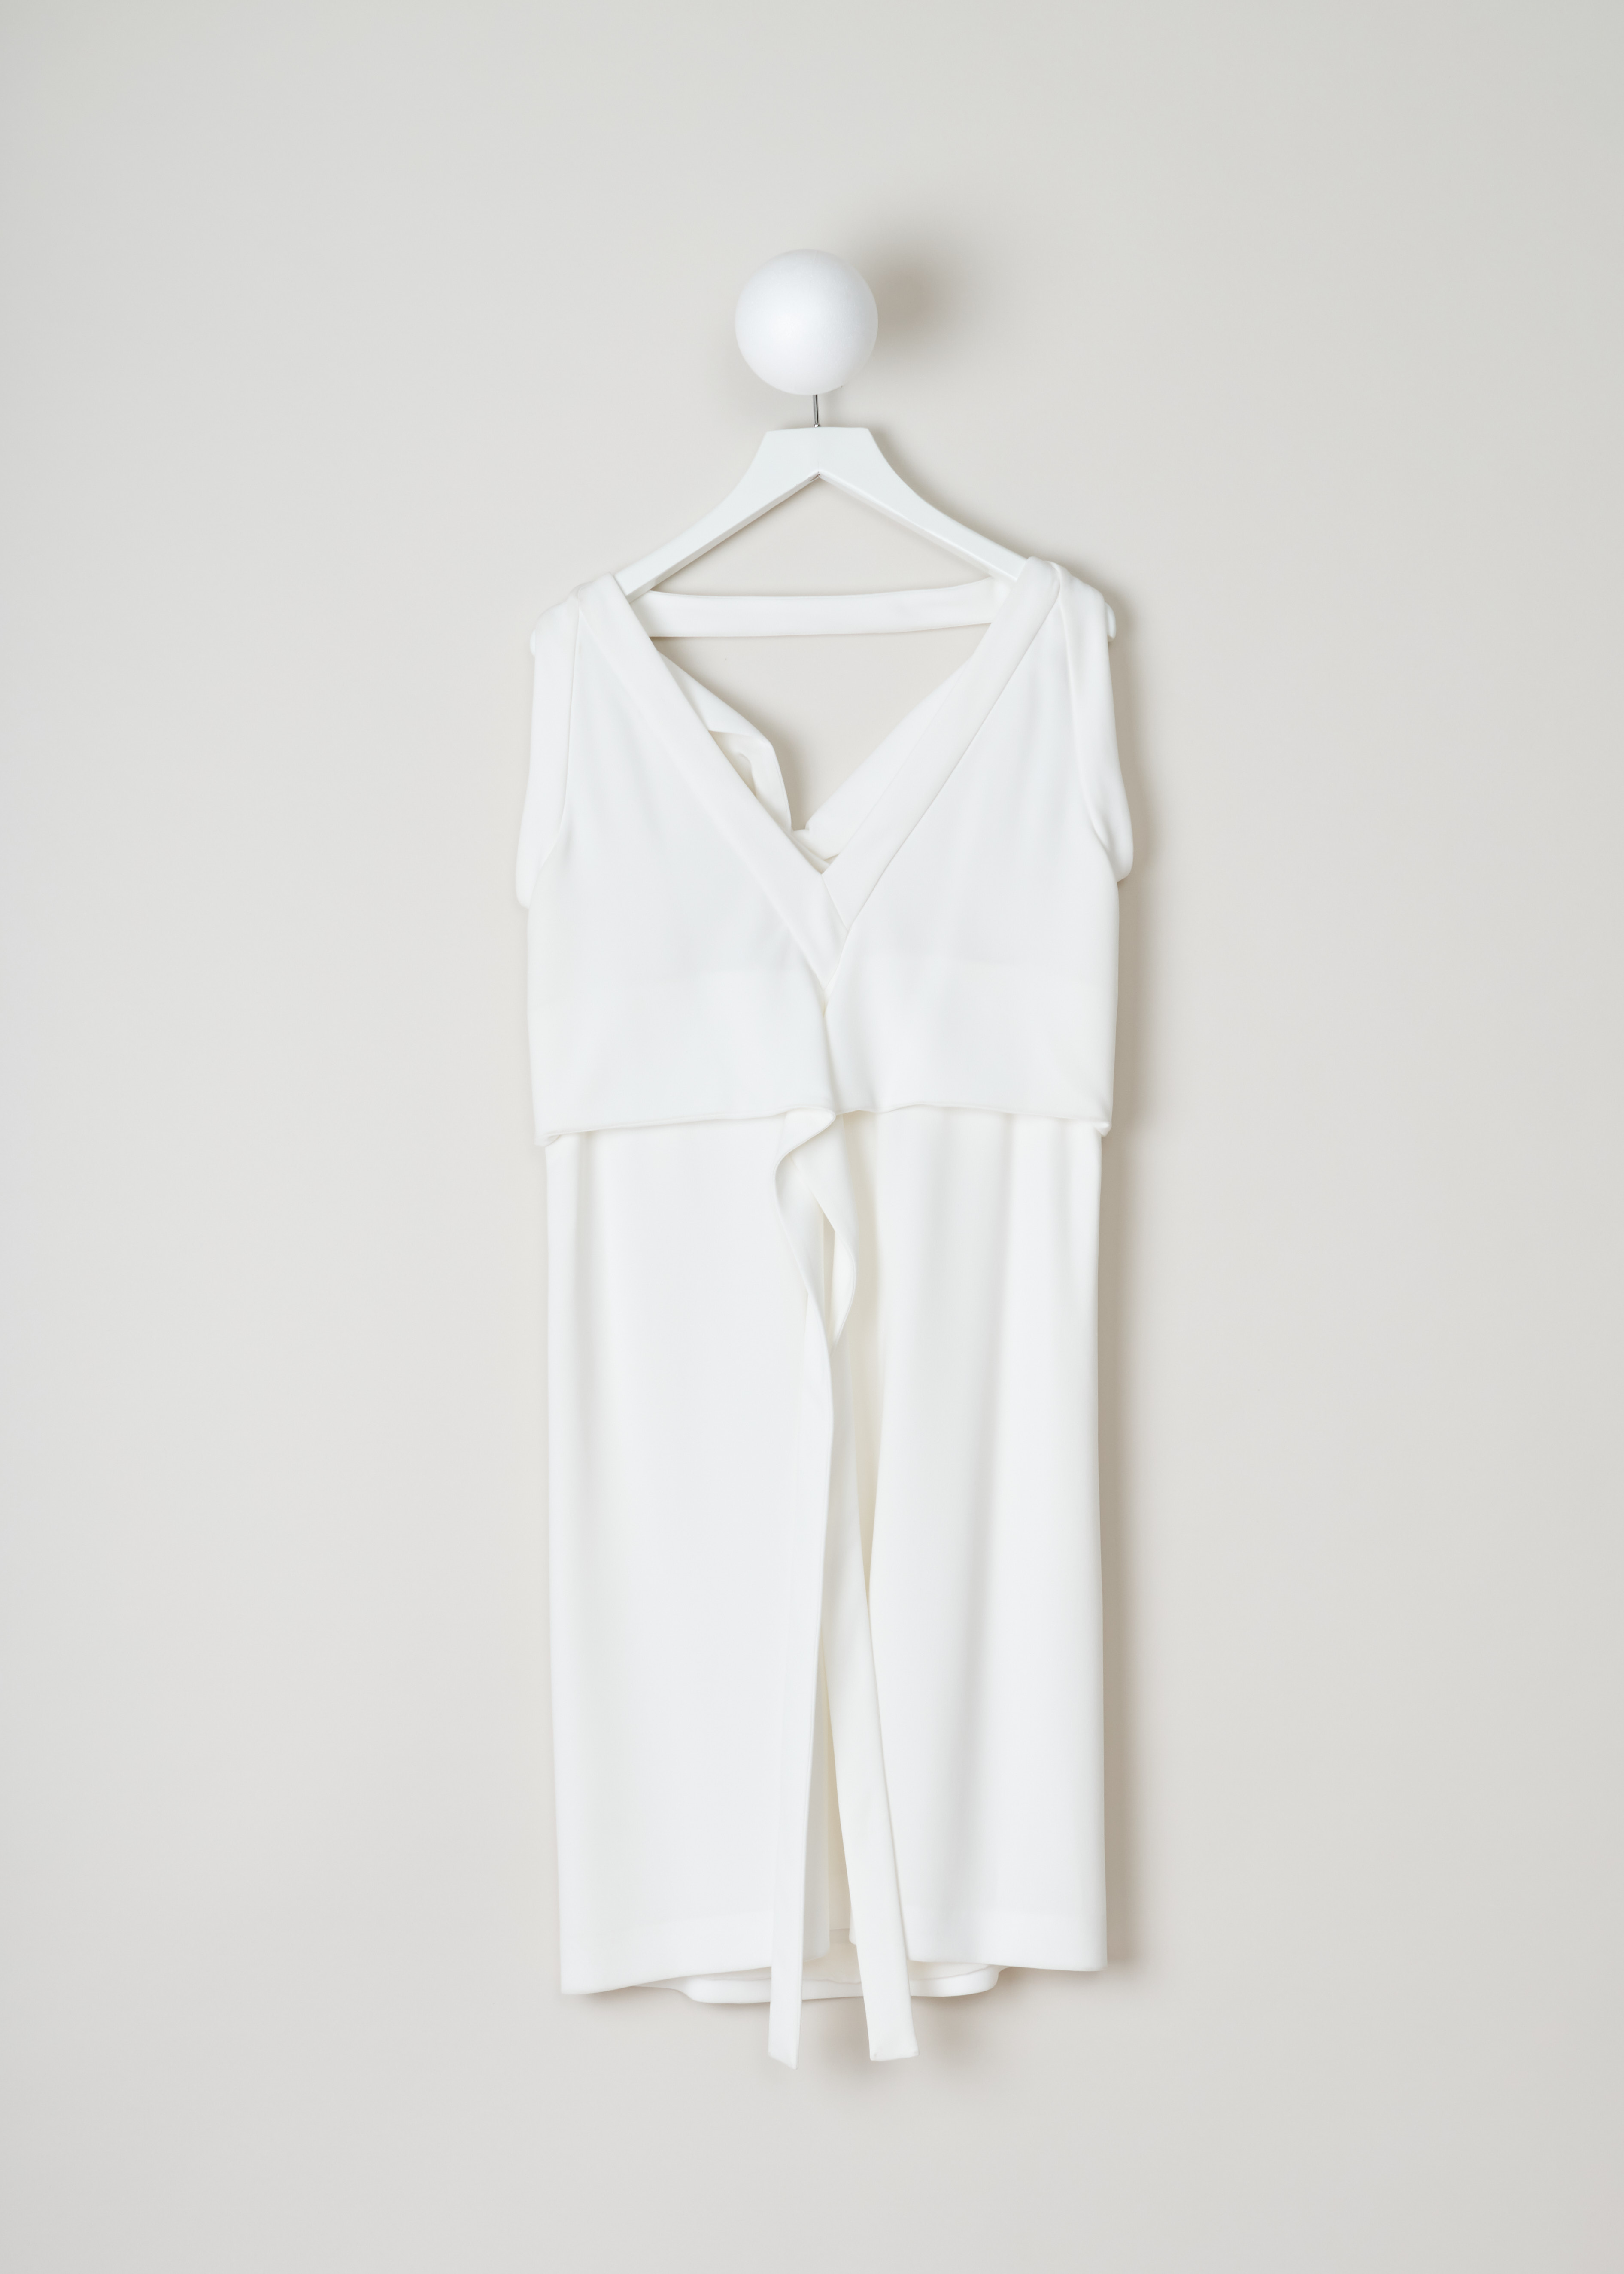 Balenciaga, Shift dress with an cowl neckline, 293704_TBDI6_9800_white, white, back. Shift dress with a draped neckline plus ribbon on the front and an open back. Furthermore a decorative ribbon can be found on the back, which either can be tied on the back, or wrapped around to the front and tied there. Concealed pockets can be found on the front. 